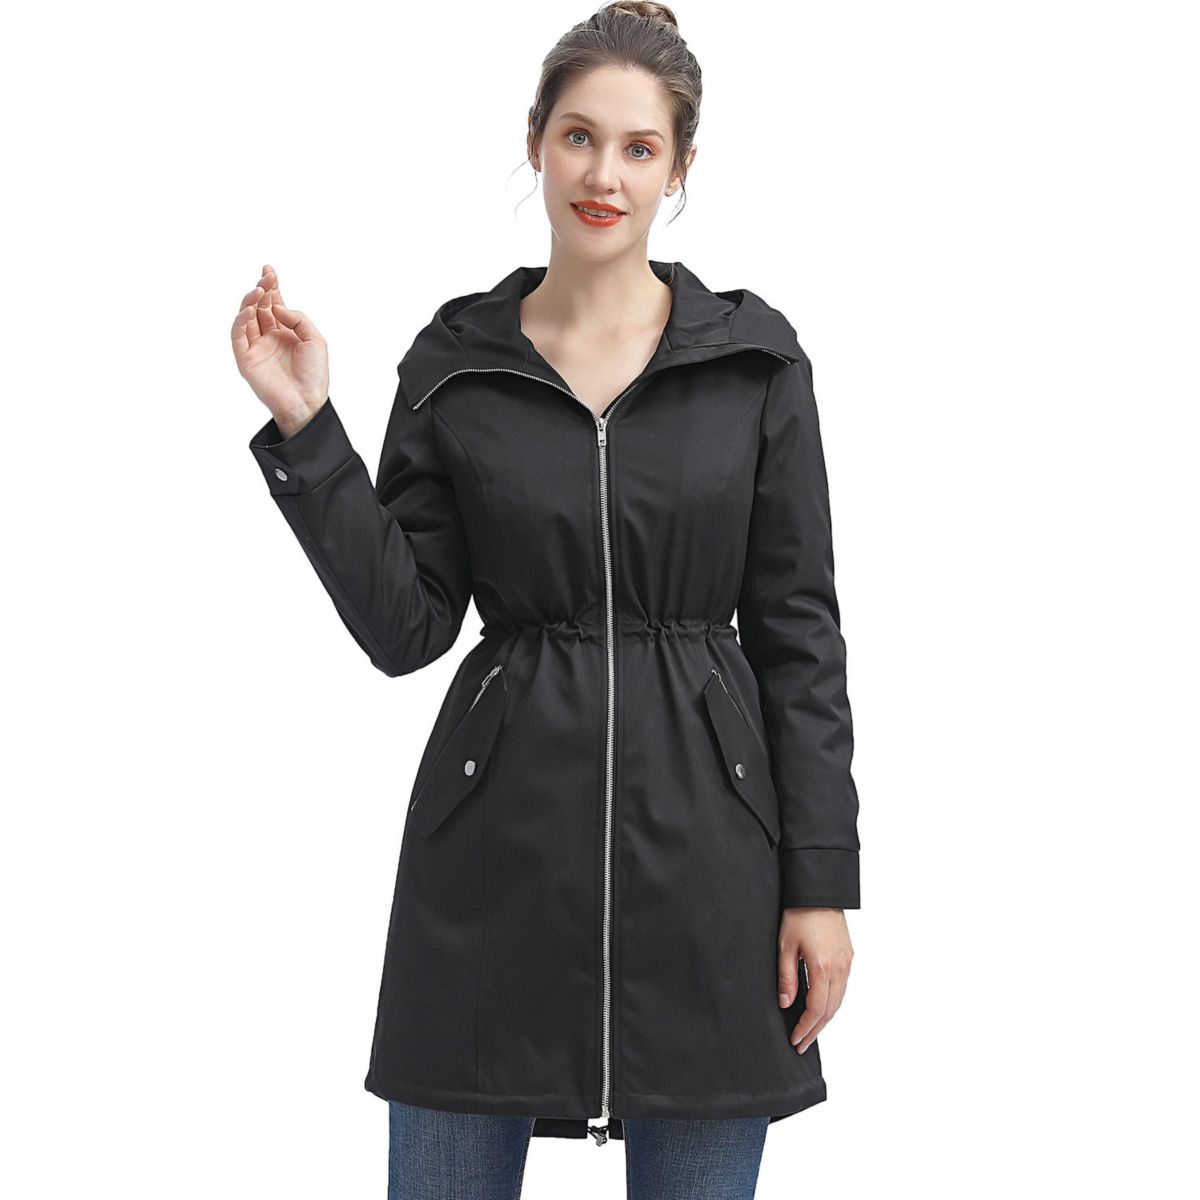 Plus Size Bgsd Zip-out Lined Hooded Raincoat BGSD